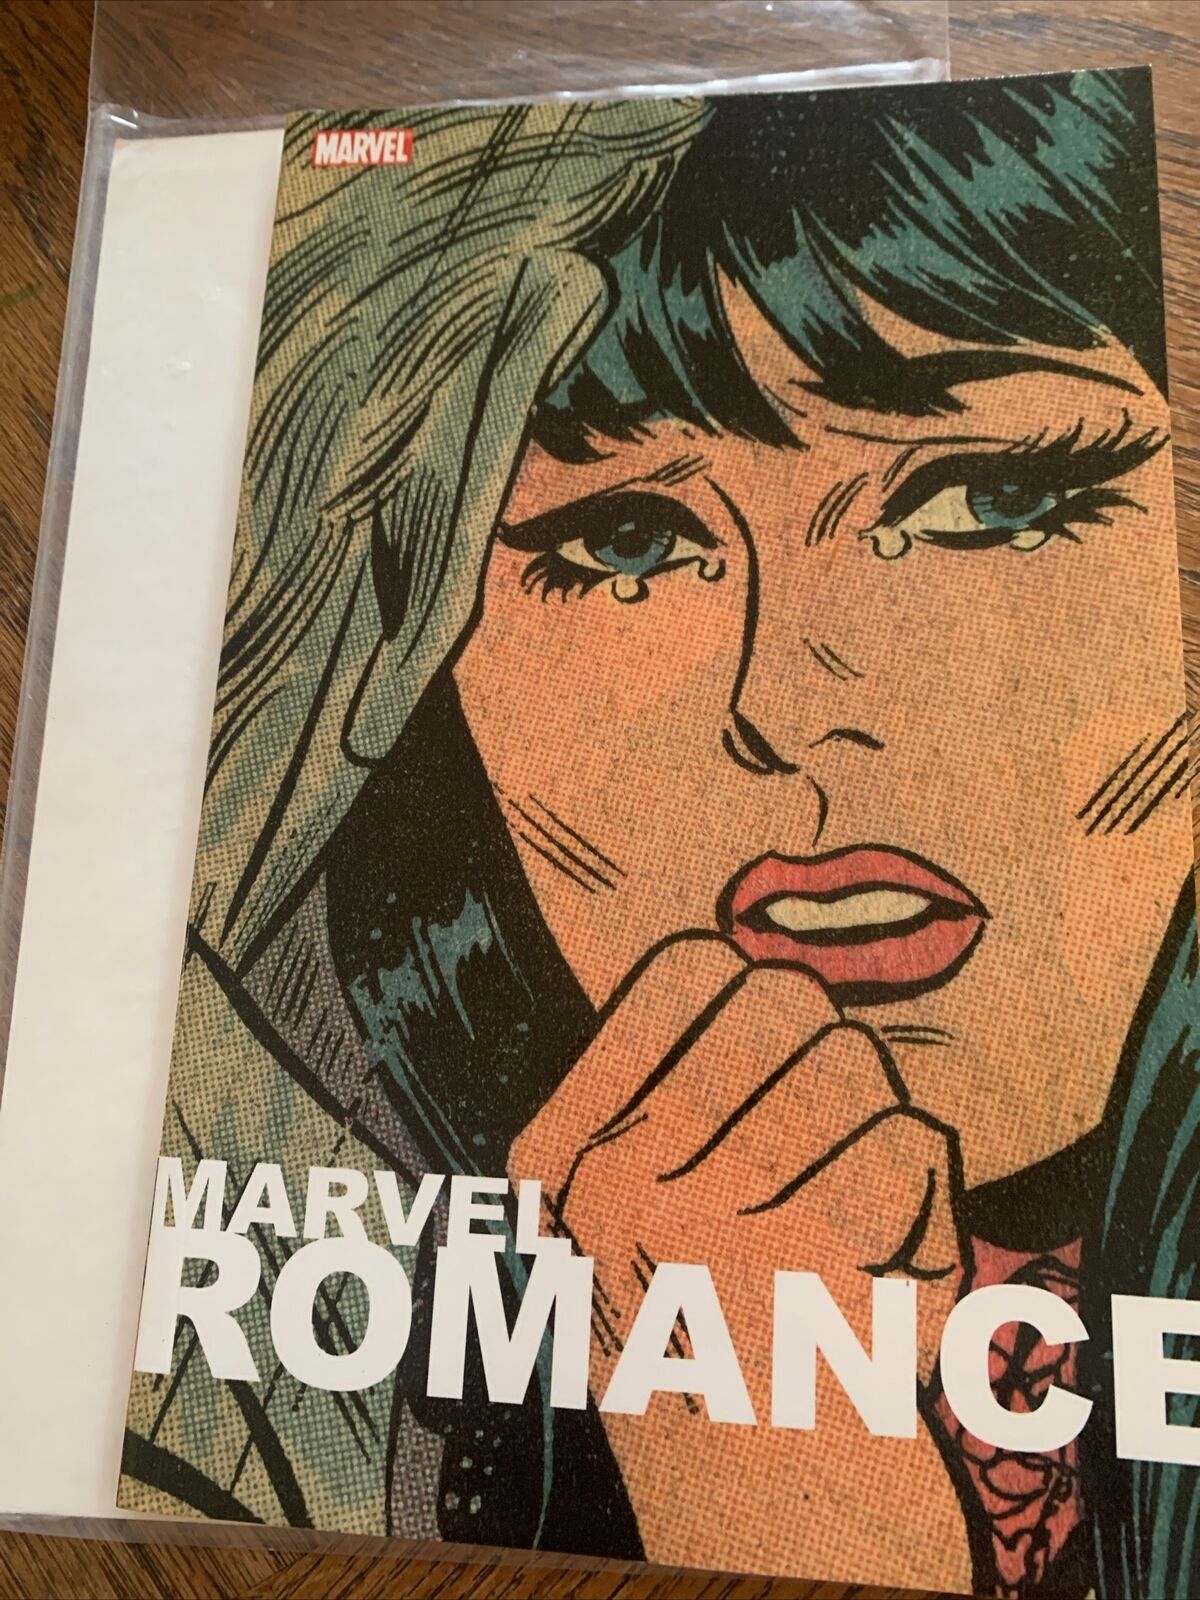 Marvel Romance (2006, First Print Edition) New Trade Paperback